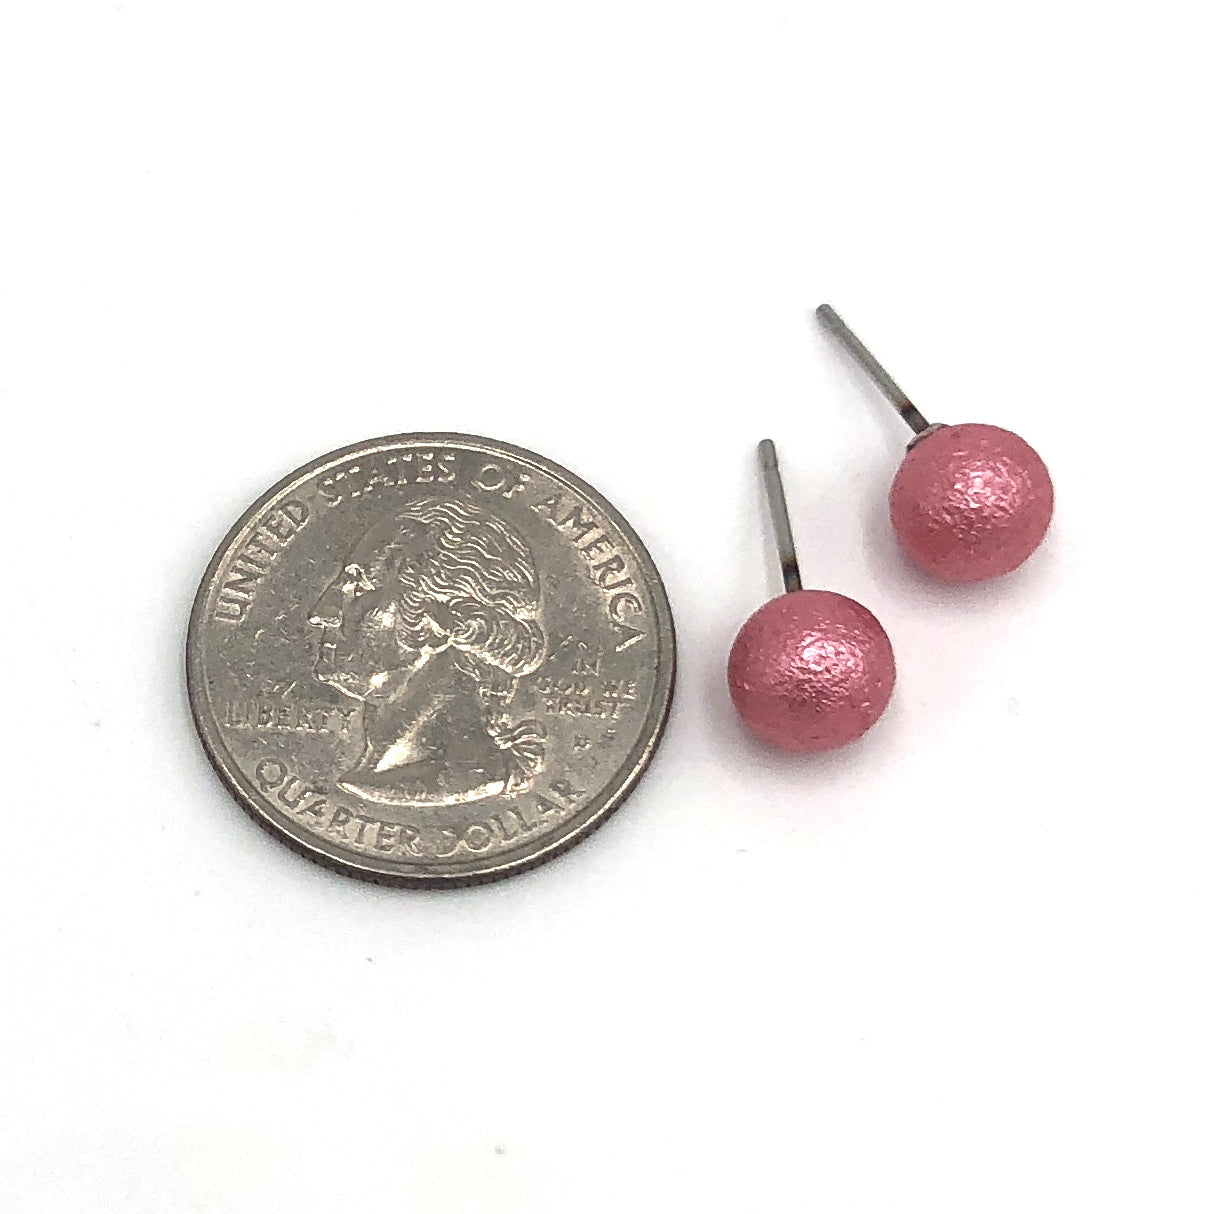 pitted ball stud earrings with quarter in picture to show size